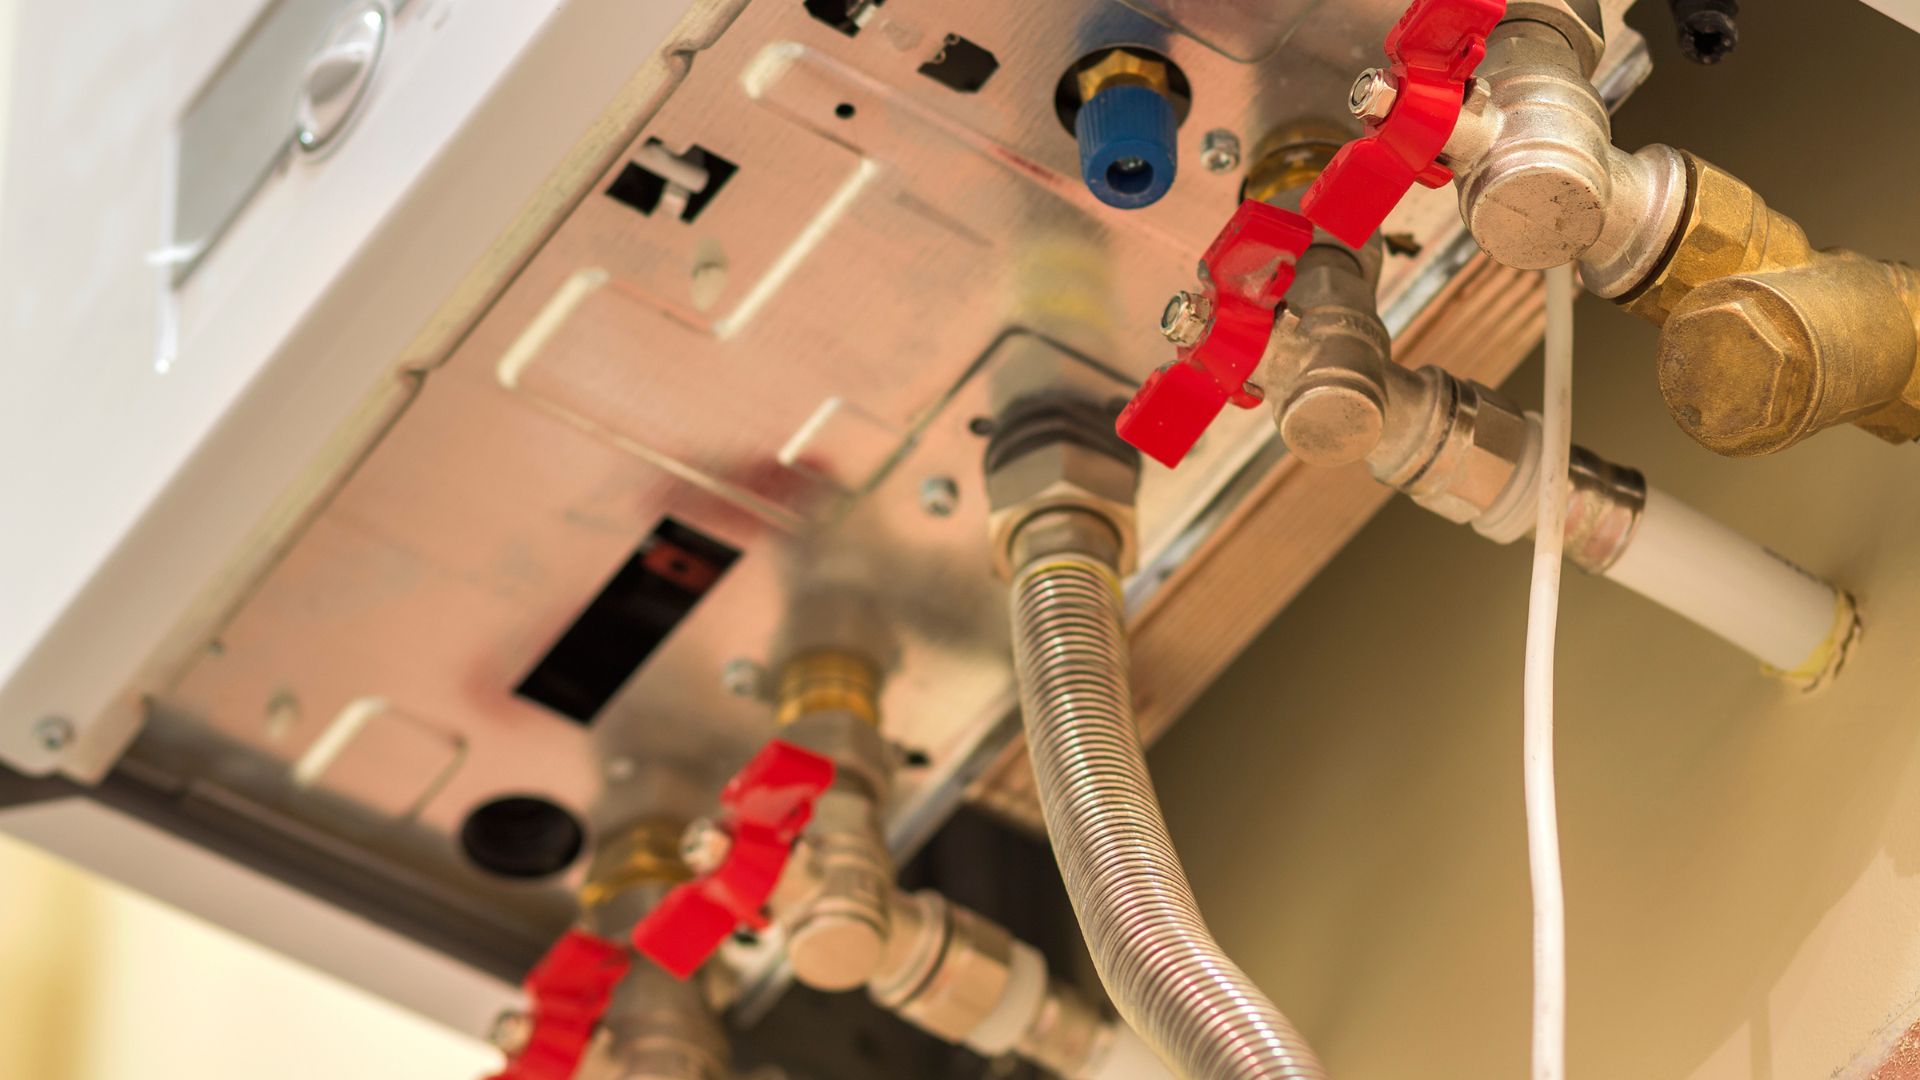 Uneven heating problems resolved by experienced plumbers, specializing in boilers.